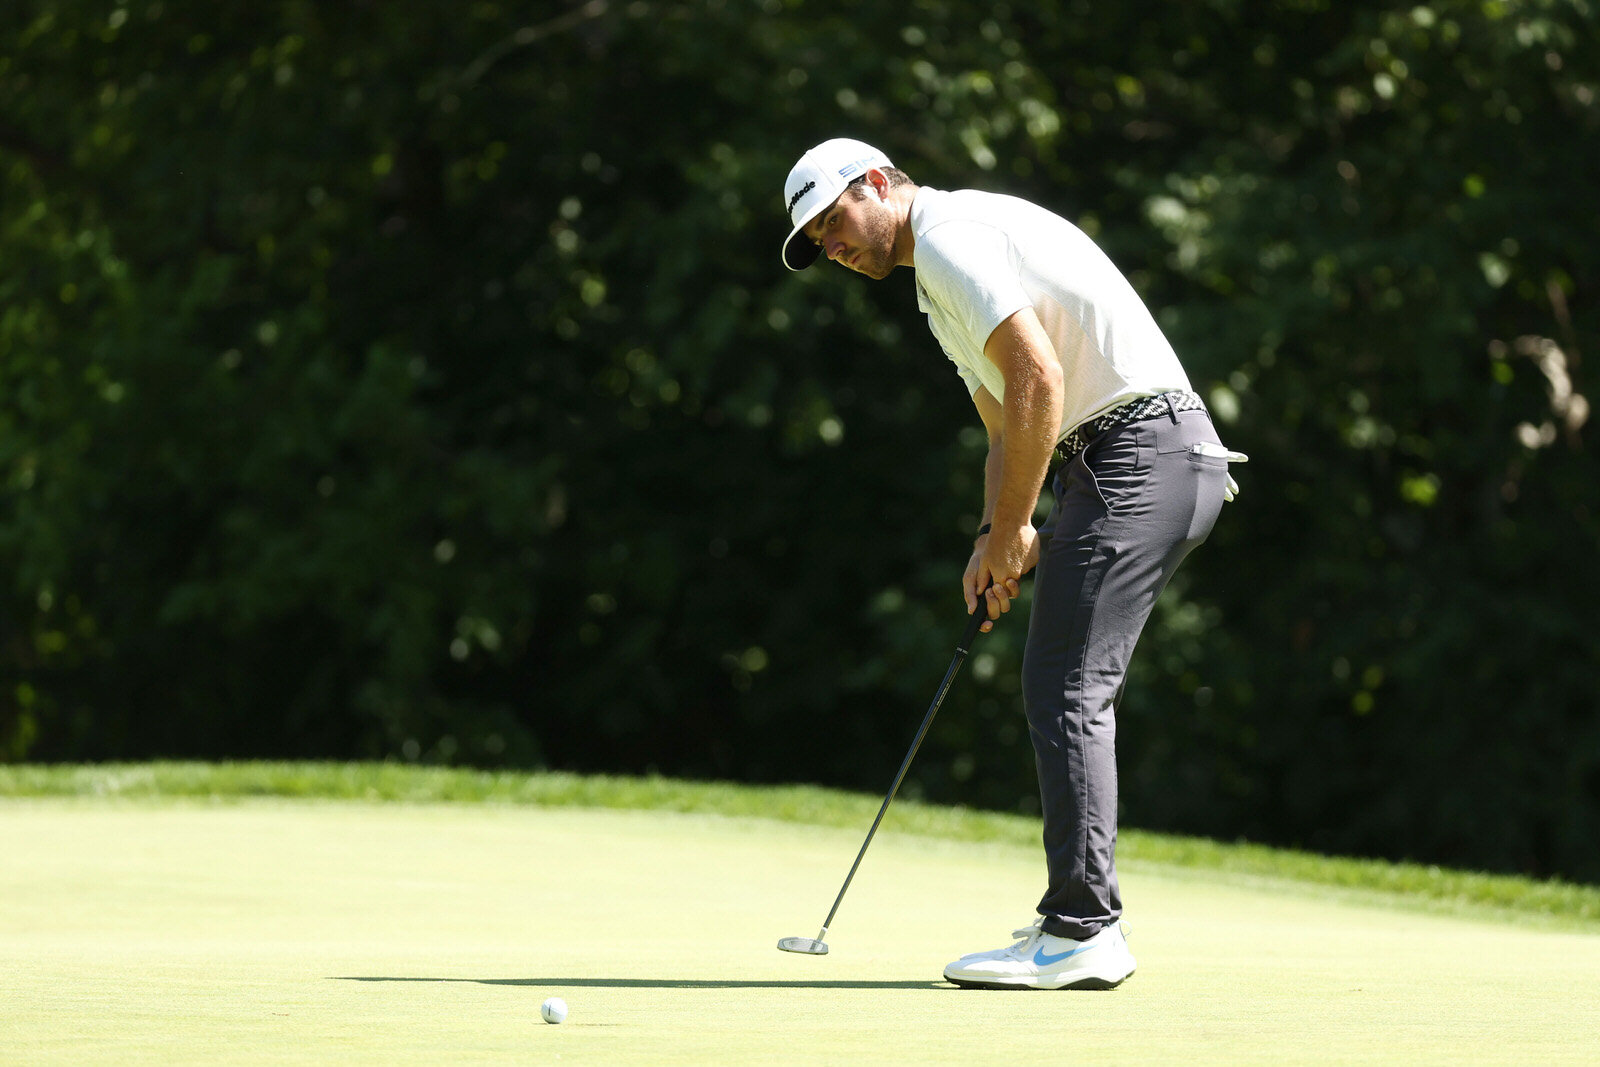  DETROIT, MICHIGAN - JULY 03: Matthew Wolff of the United States putts on the eighth green during the second round of the Rocket Mortgage Classic on July 03, 2020 at the Detroit Golf Club in Detroit, Michigan. (Photo by Gregory Shamus/Getty Images) 